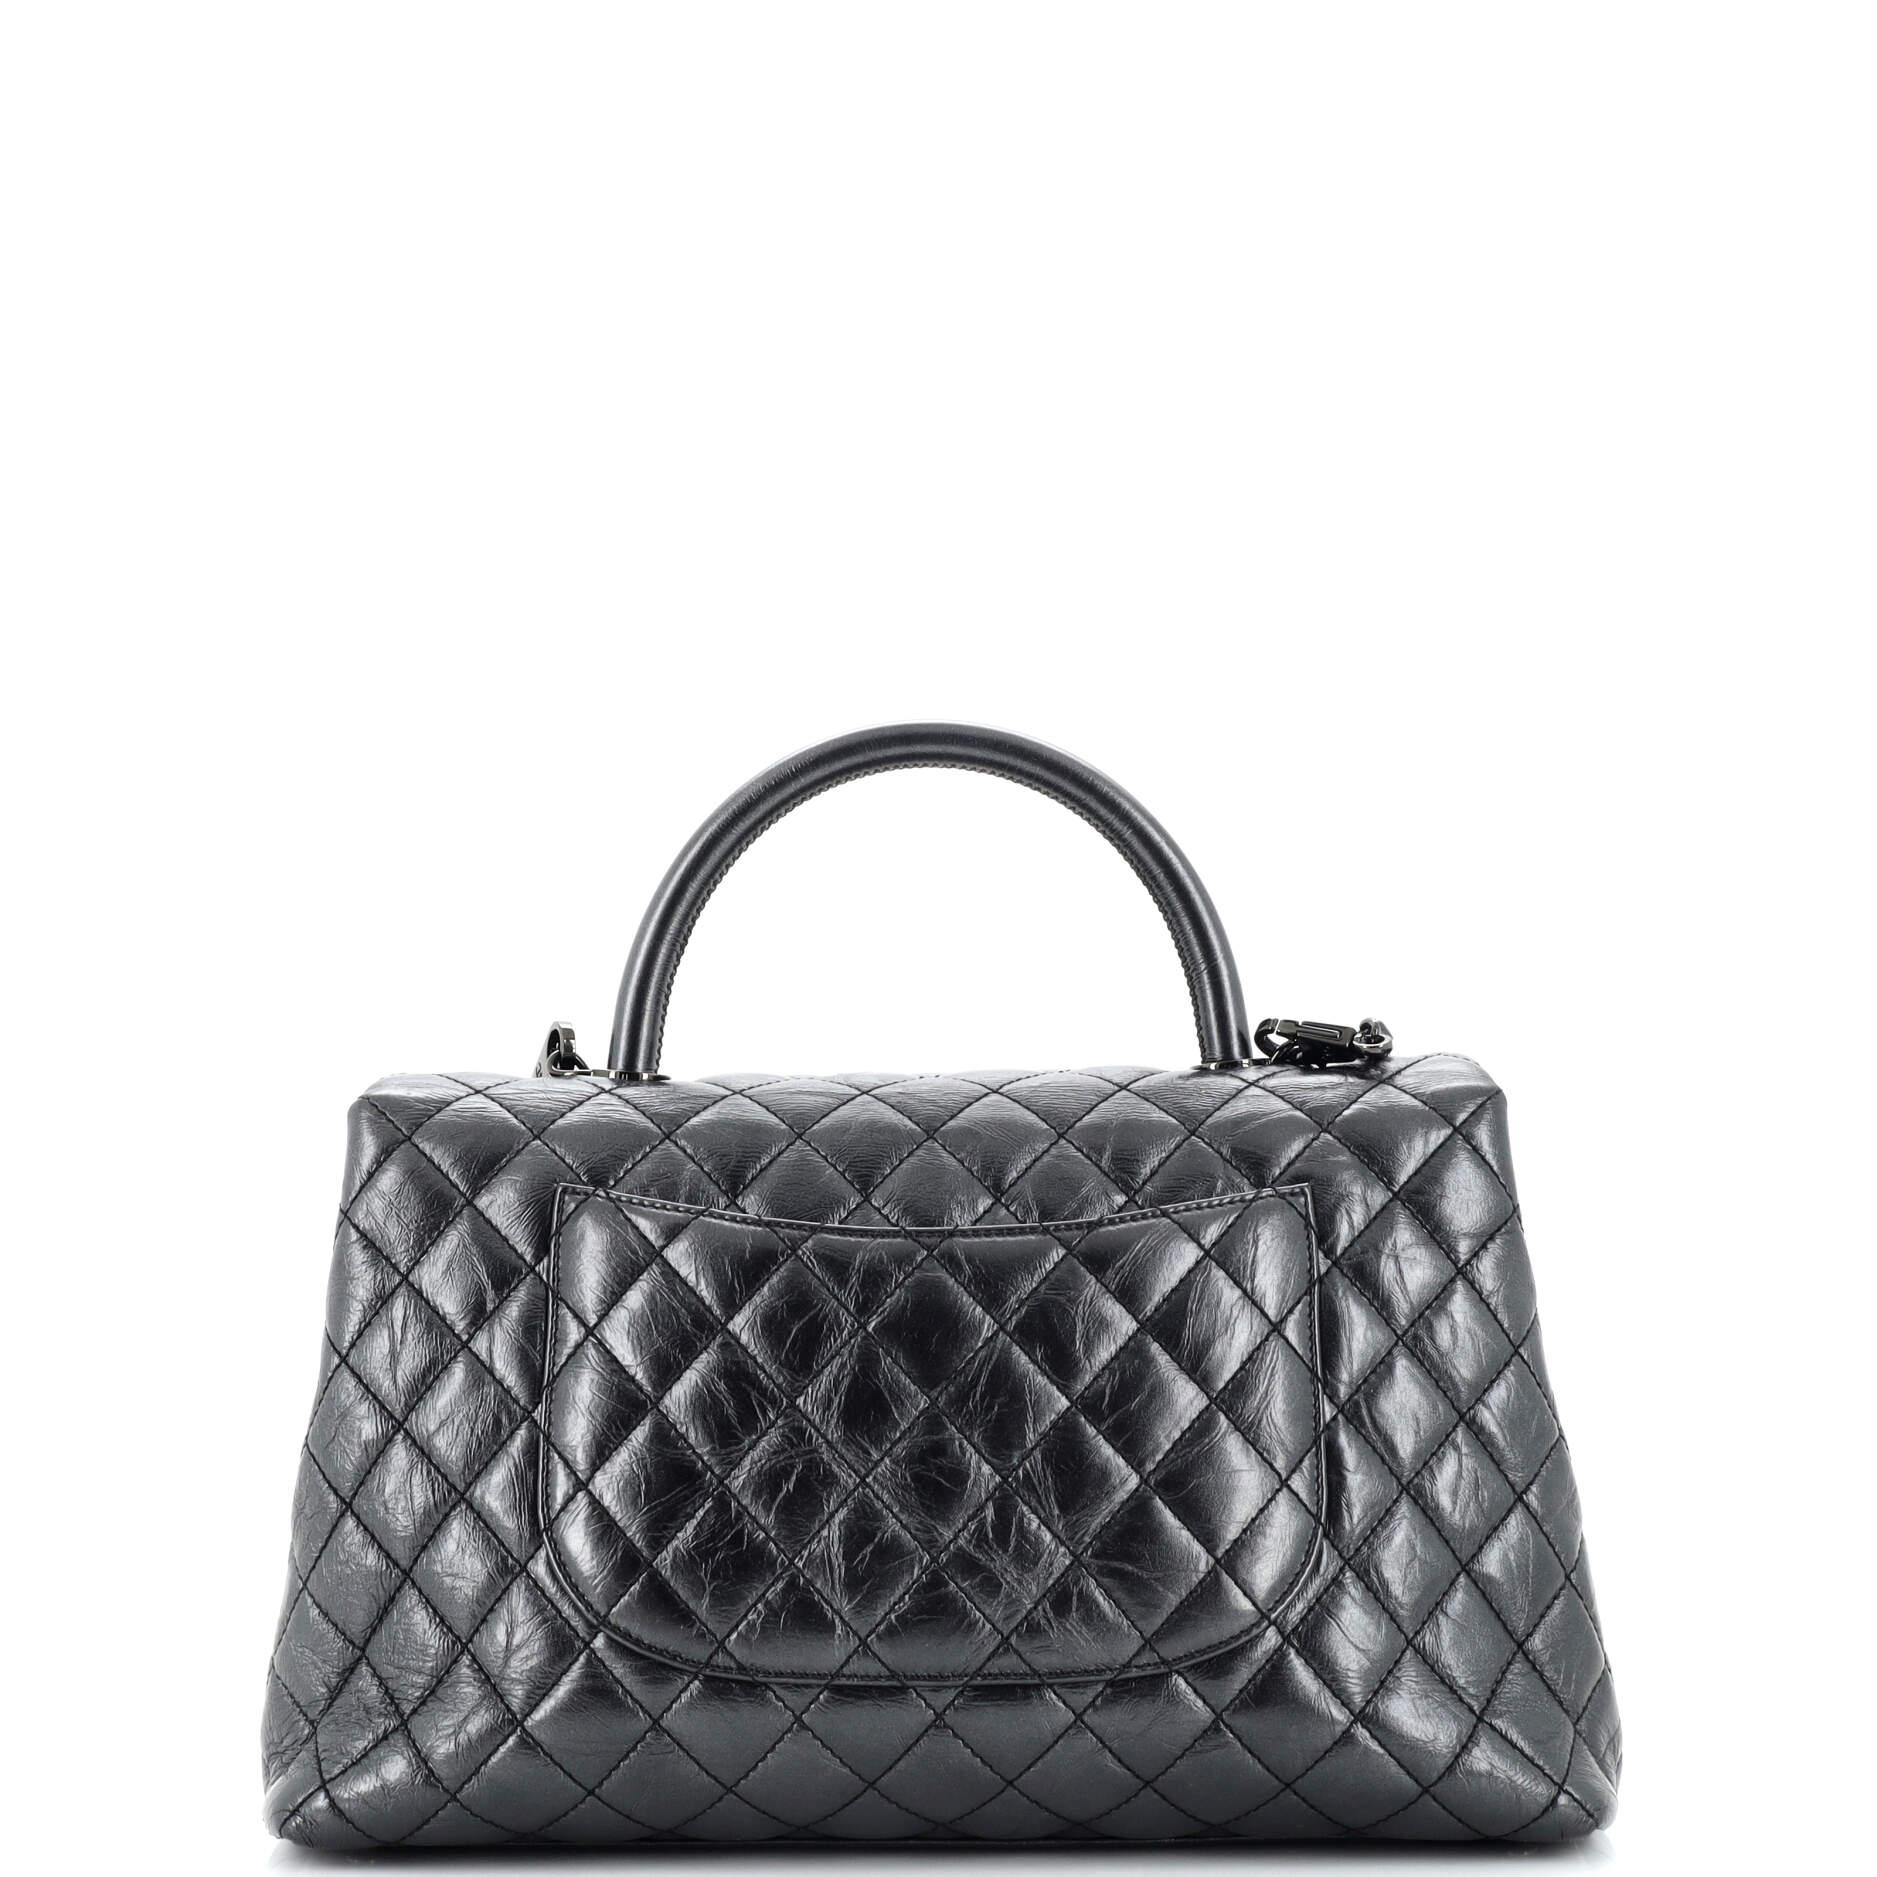 Women's Chanel Coco Top Handle Bag Quilted Aged Calfskin Medium